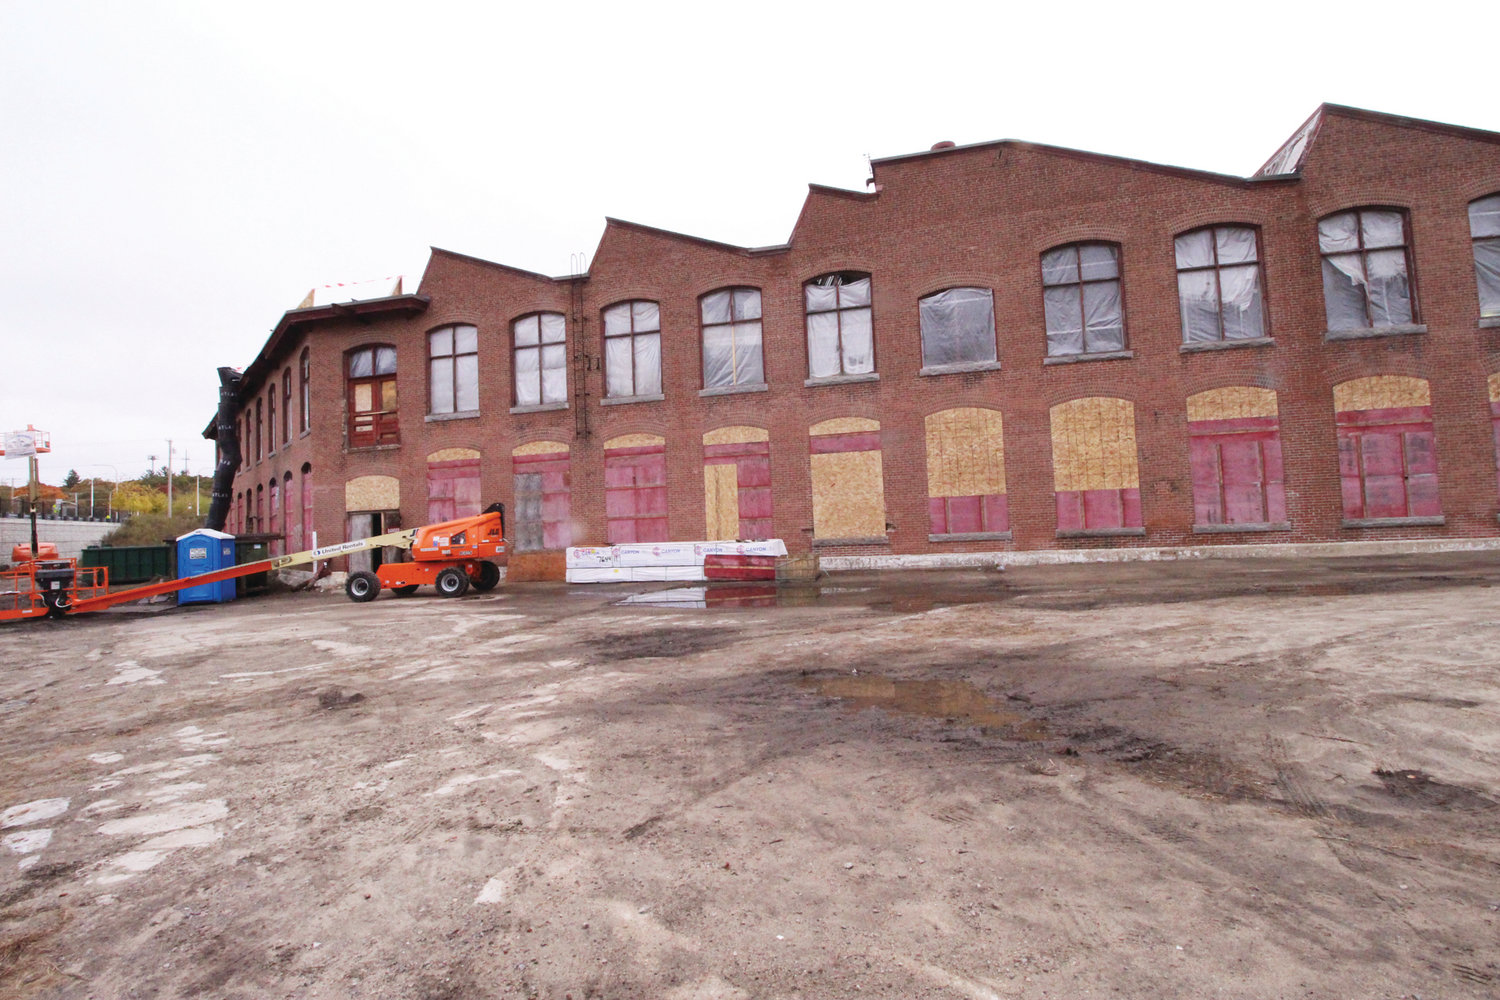 The exterior of the historic Sawtooth Building, with a unique appearance that was first constructed in 1905, and served as part of the Apponaug Mills. It is being transitioned into the modern service headquarters for AAA Northeast. It will be opening in the fall of 2020.